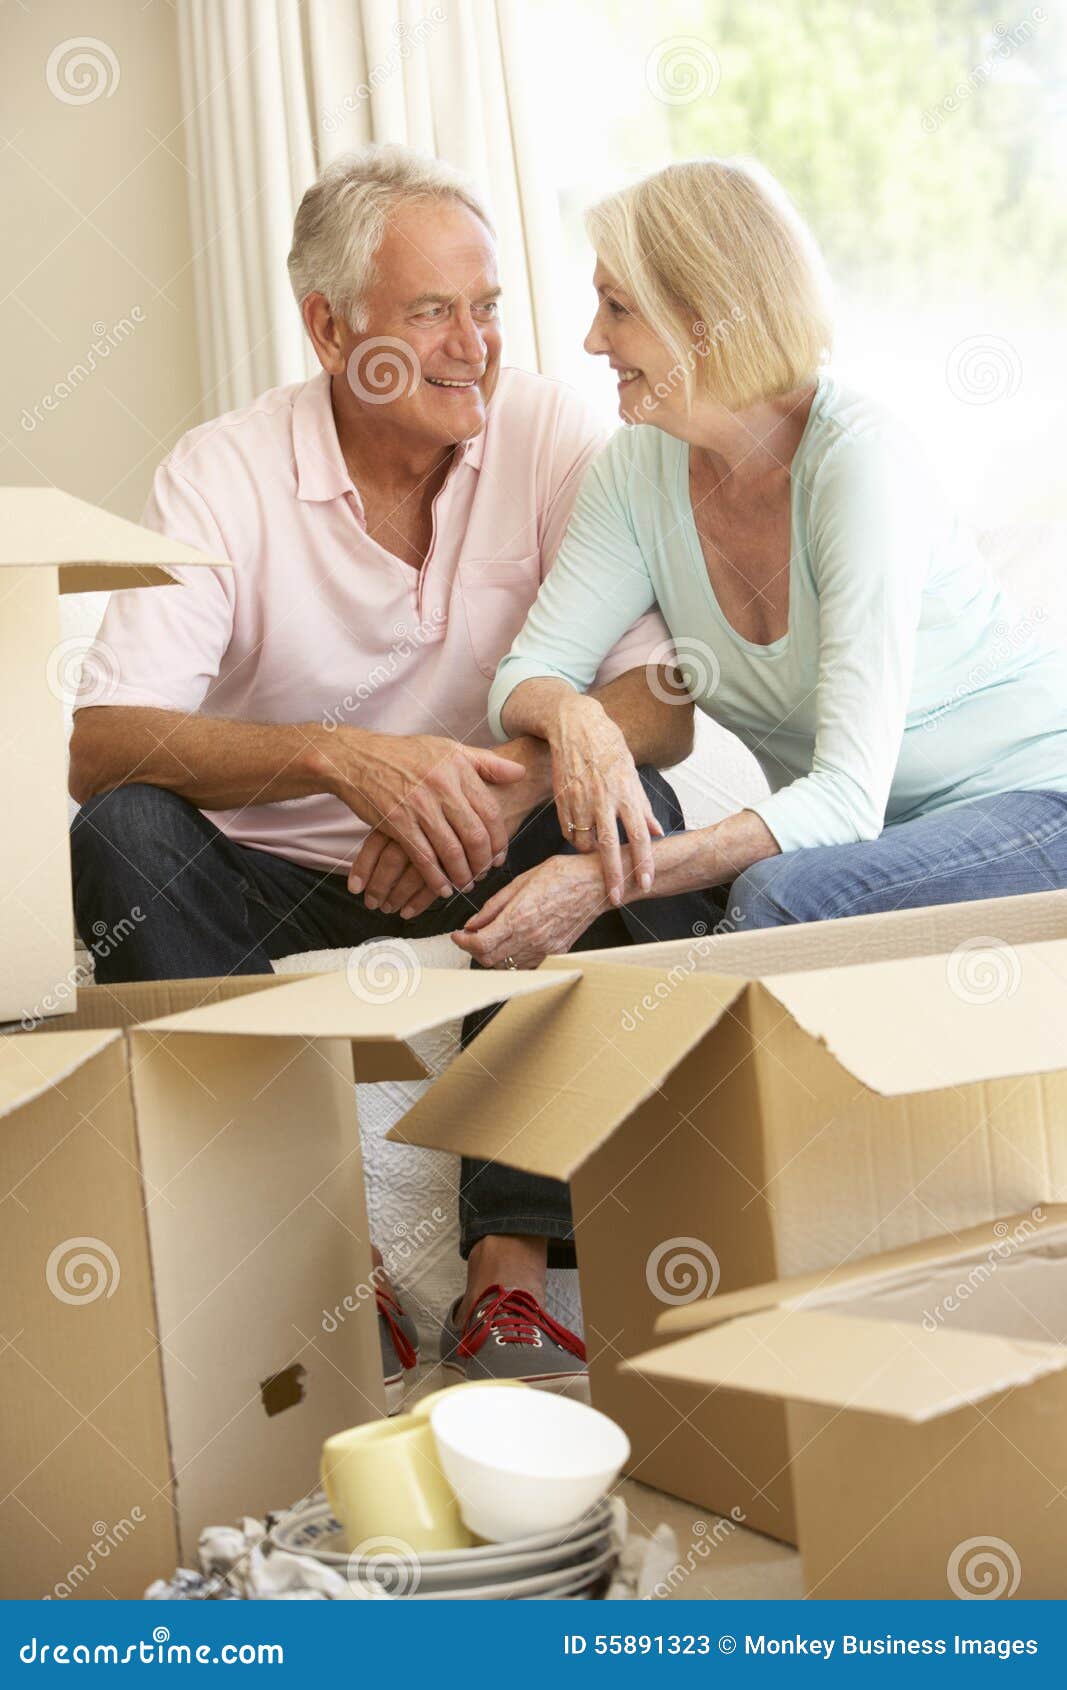 senior couple moving home and packing boxes